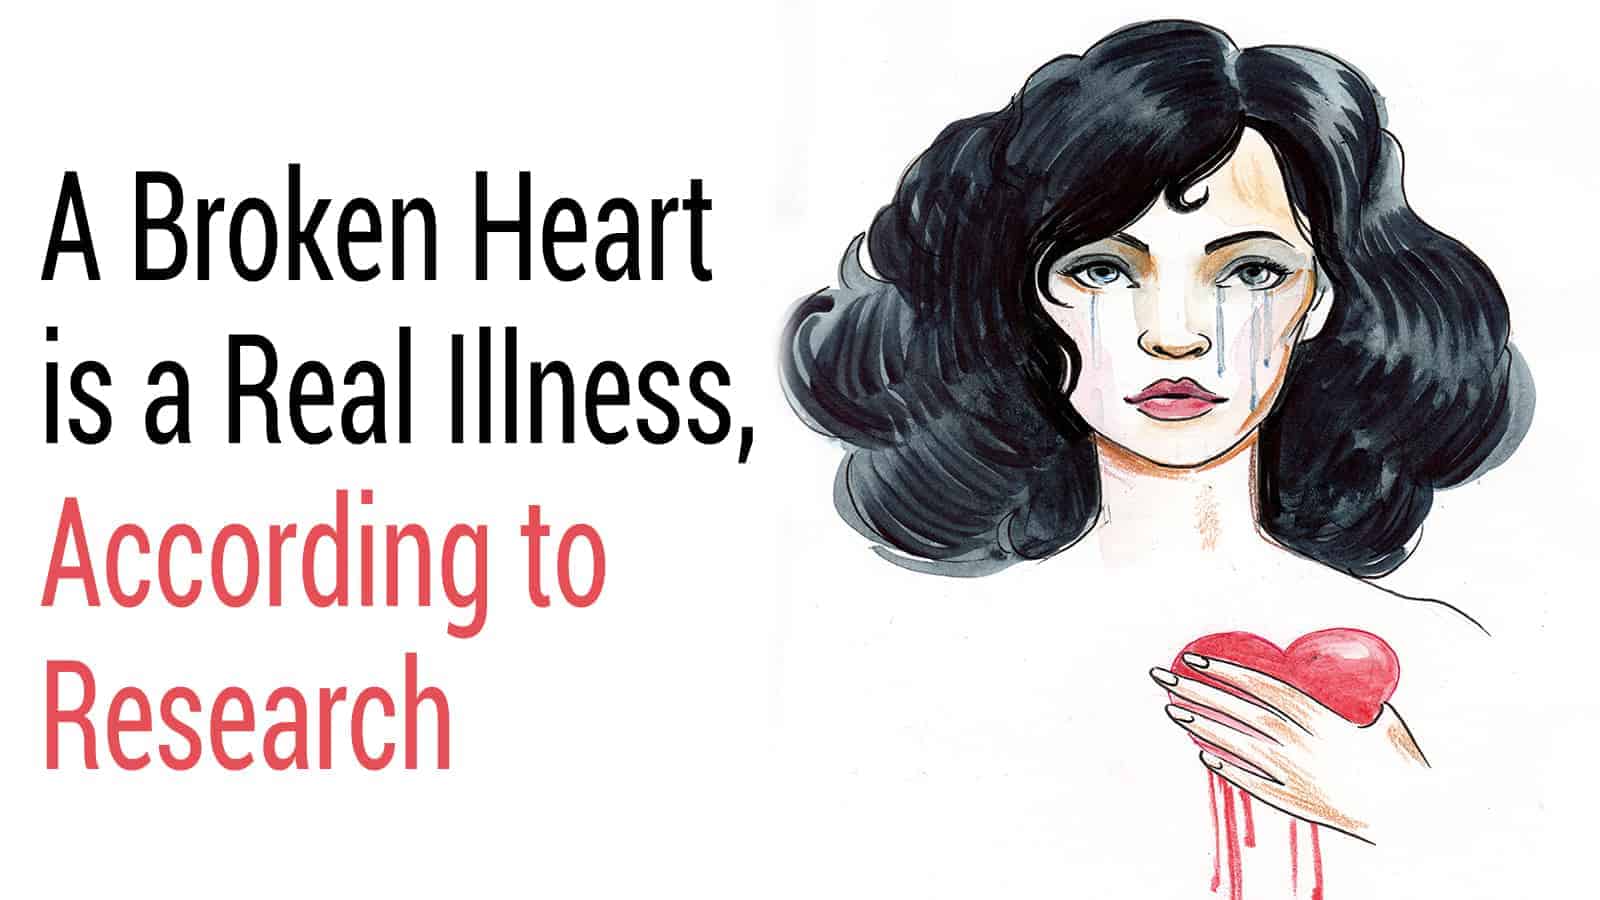 A Broken Heart is a Real Illness, According to Research